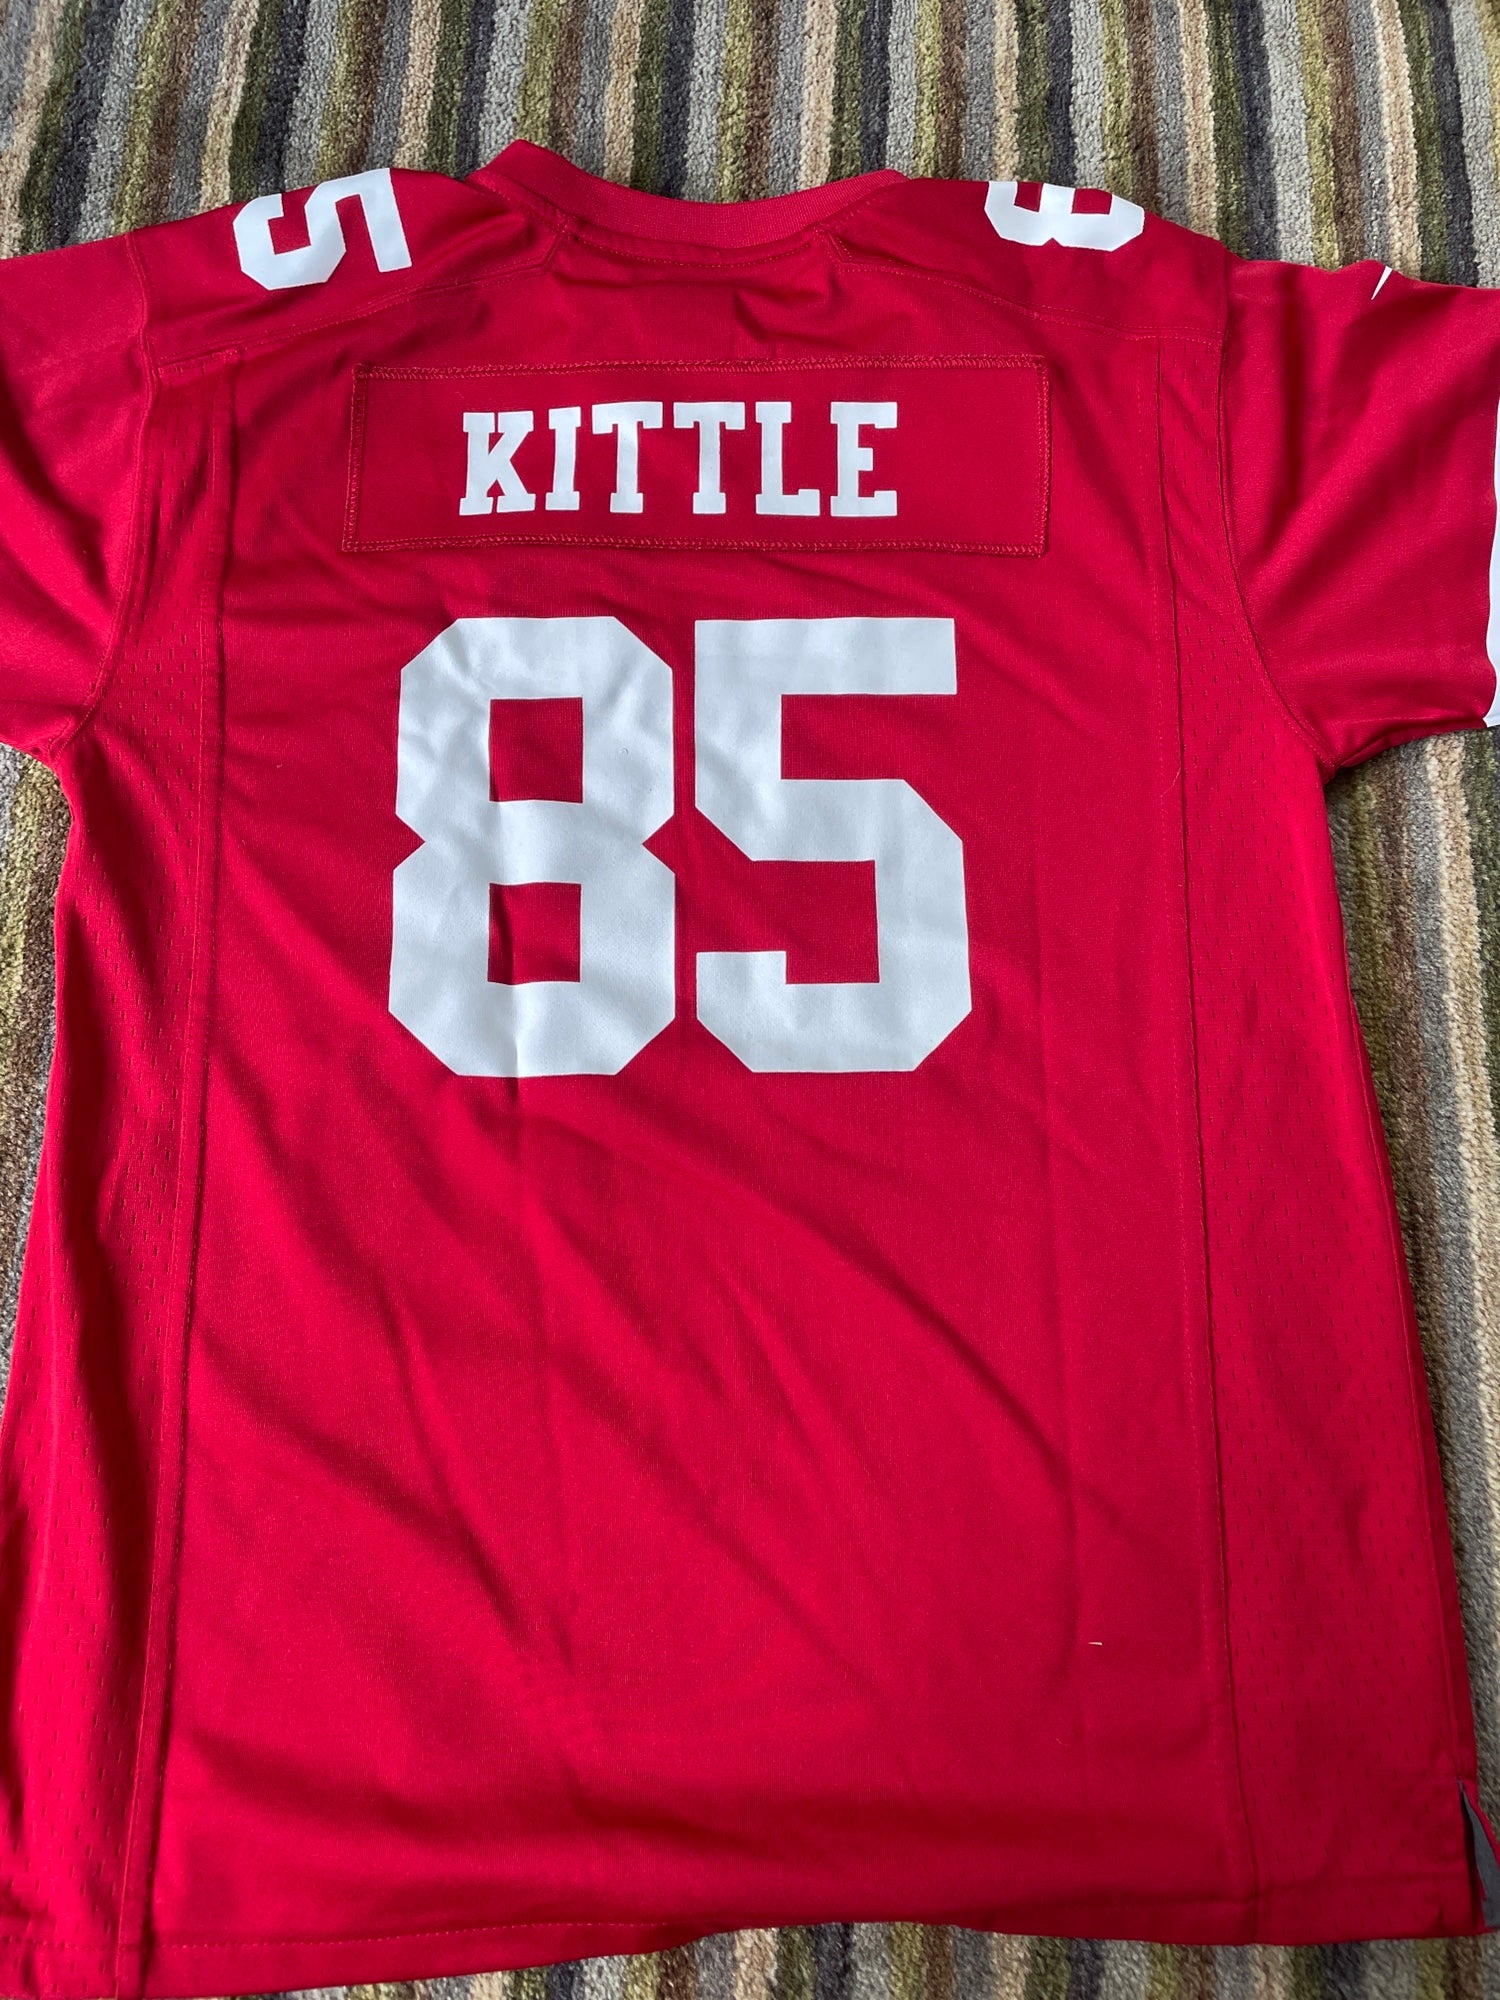 youth kittle jersey 49ers